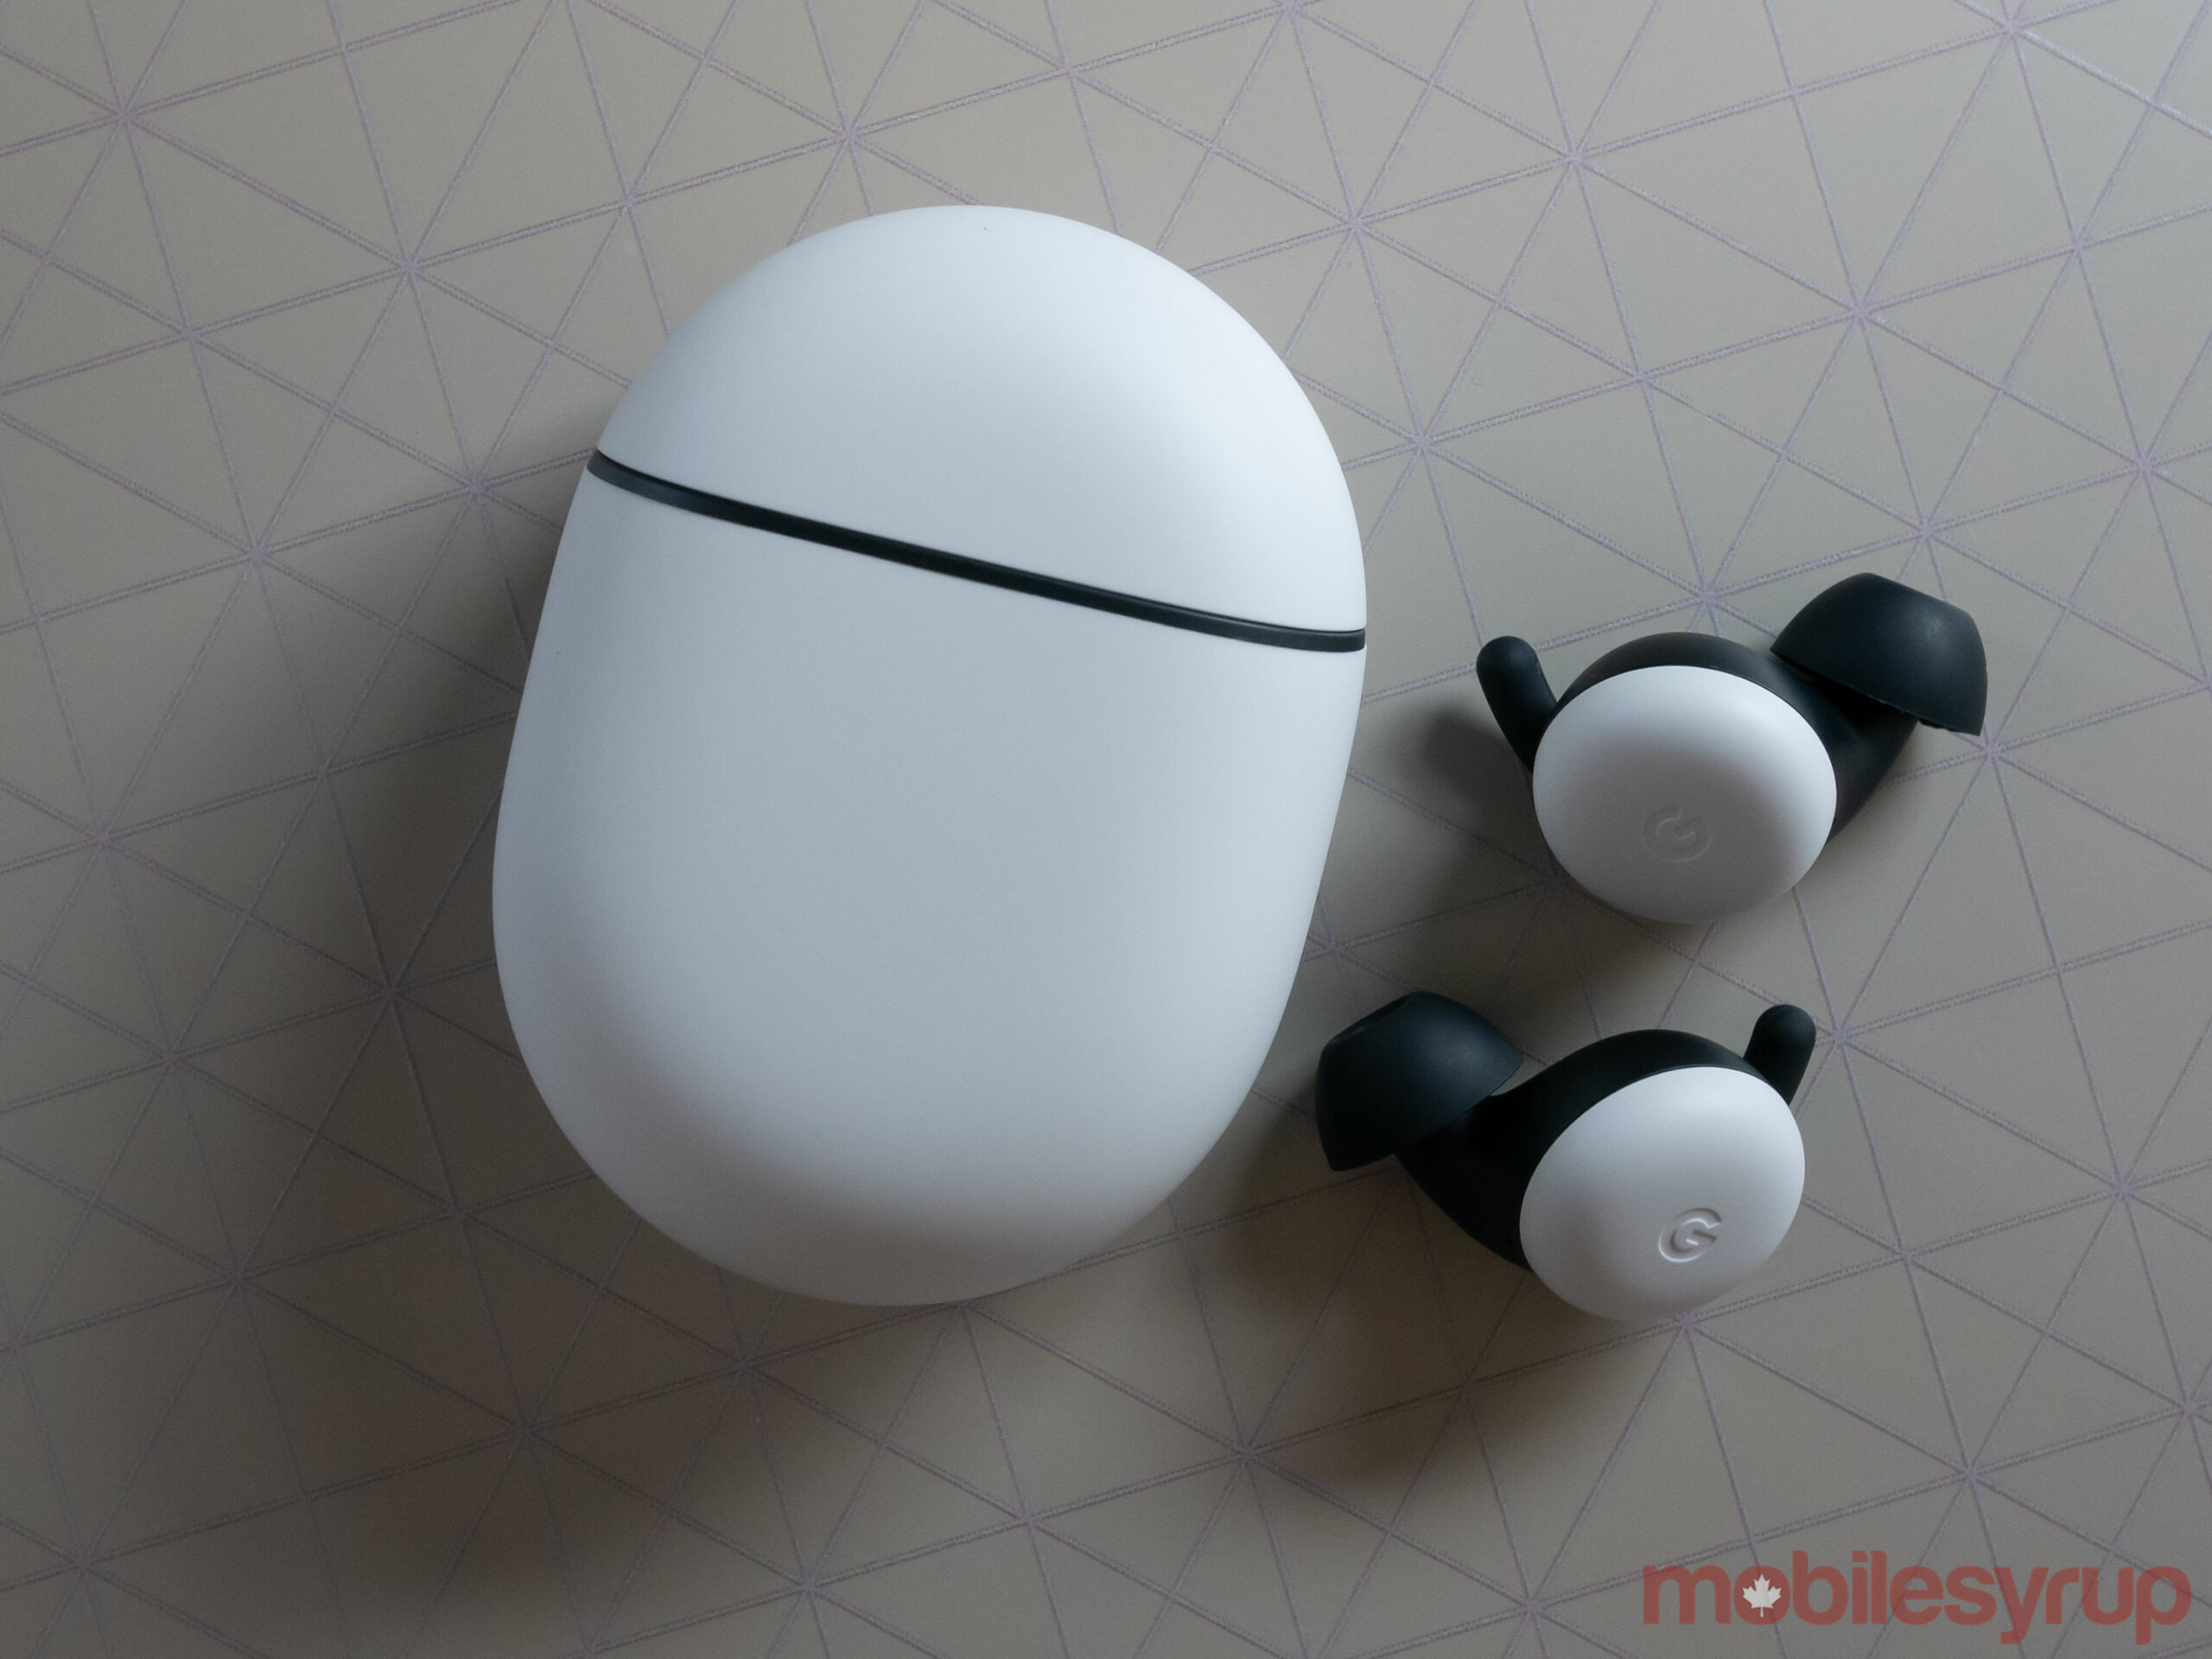 Pixel Buds 2020 and case 